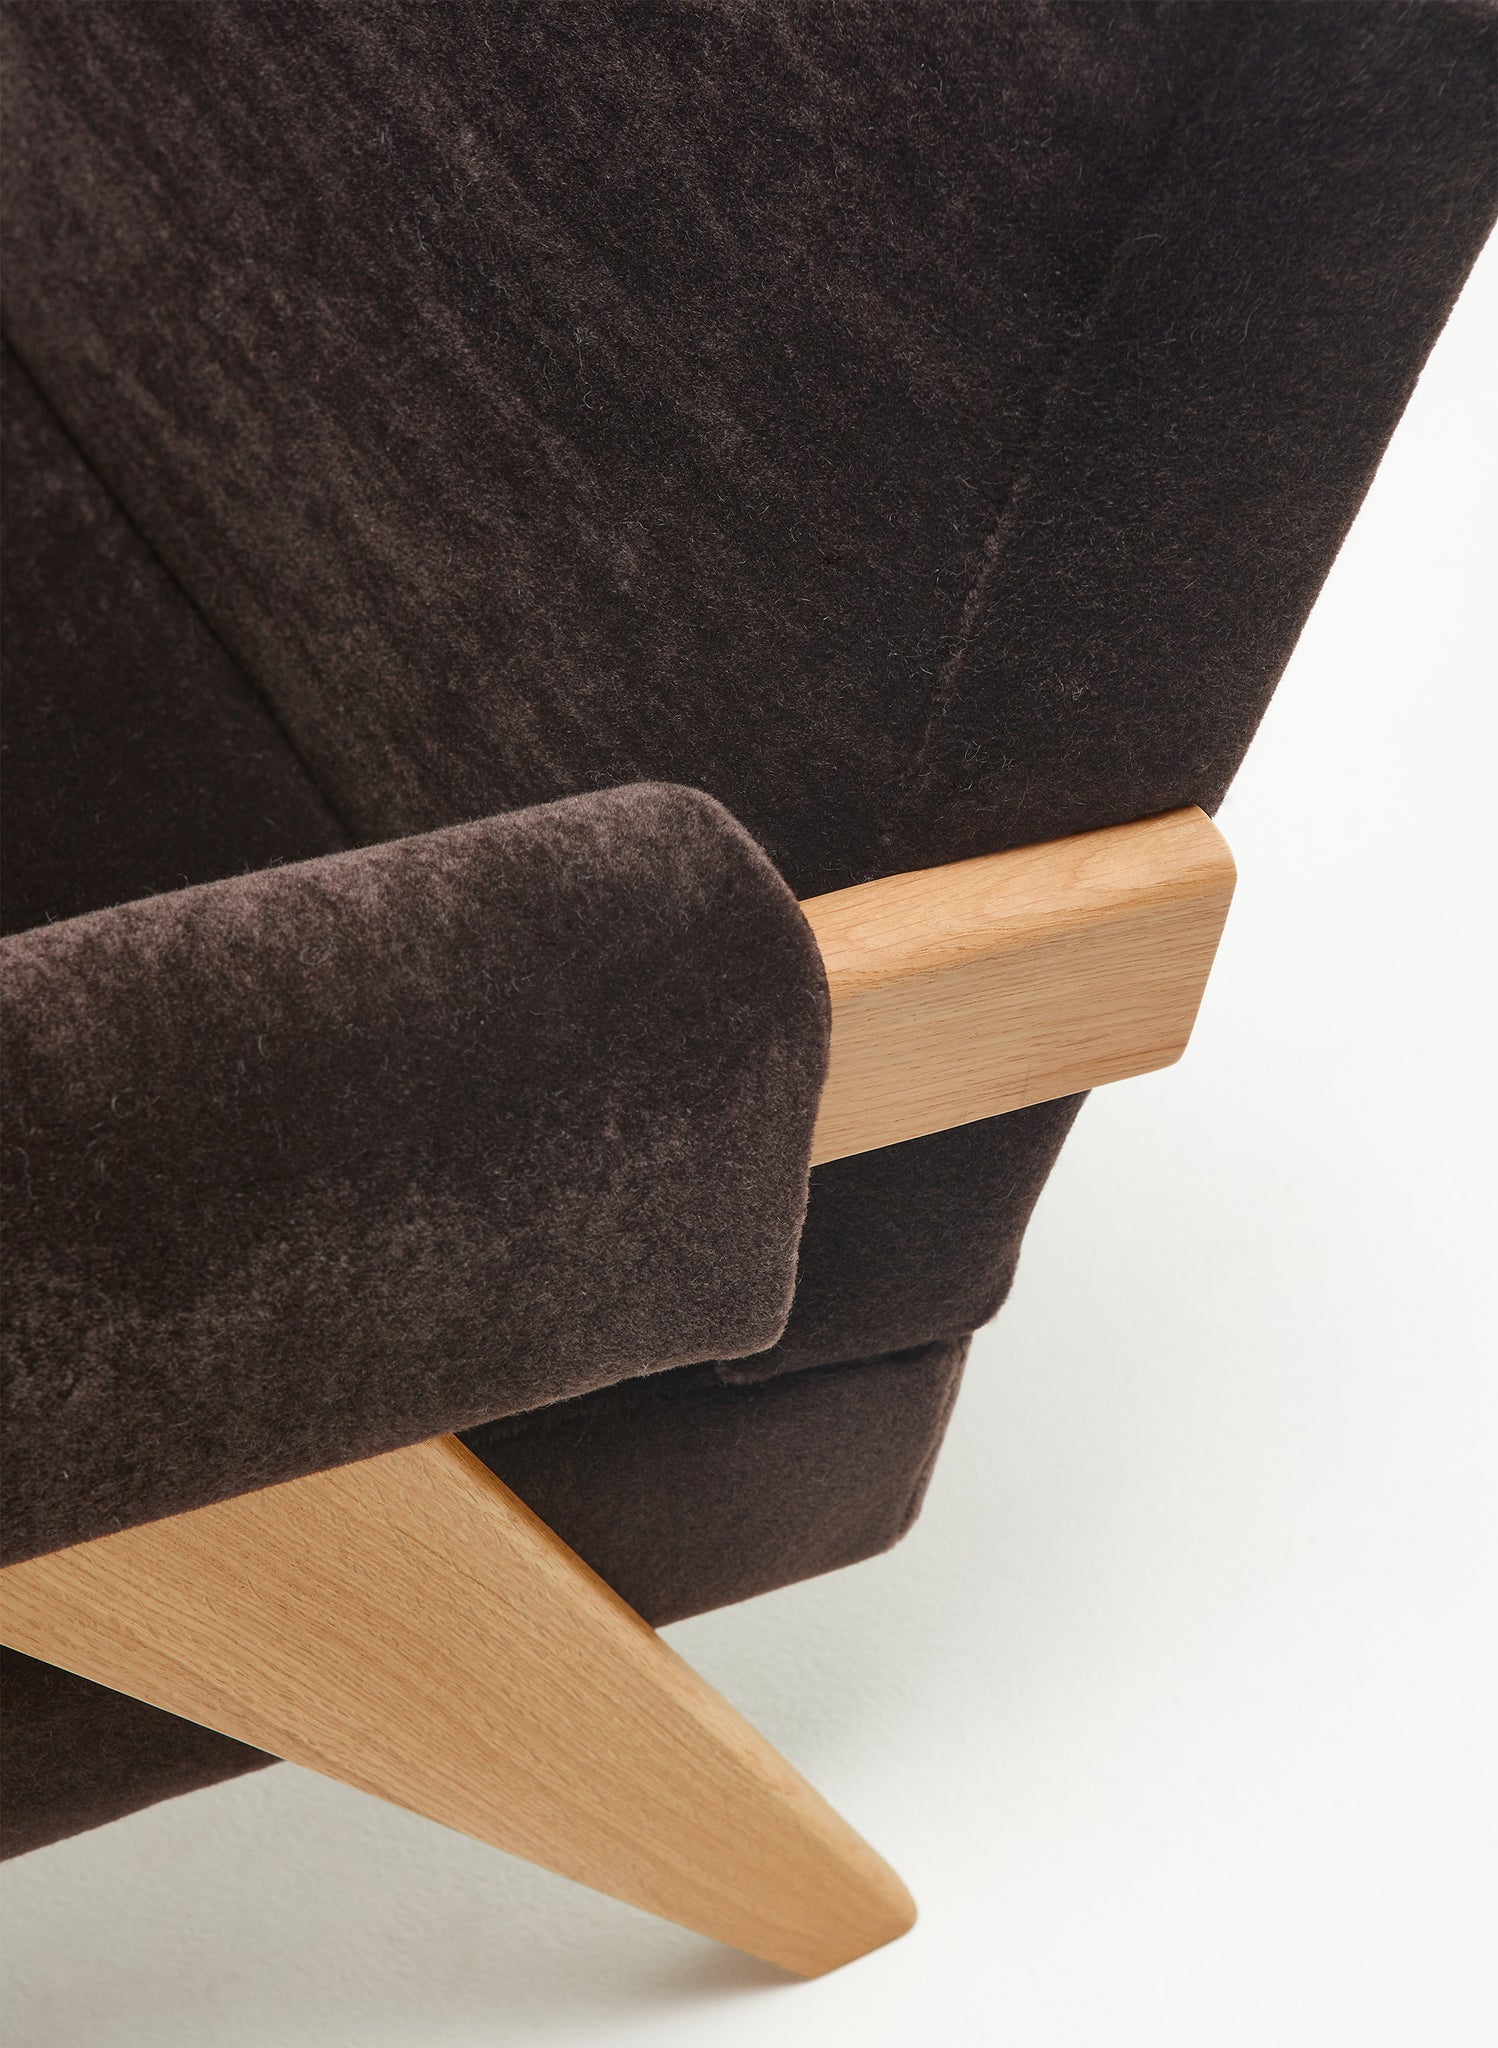 Close-up 1 of an authentic chandigarh lounge chair, pierre jeanneret era, natural oak frame, pierre frey choco teddy mohair upholstery, by Klarel #K35-31